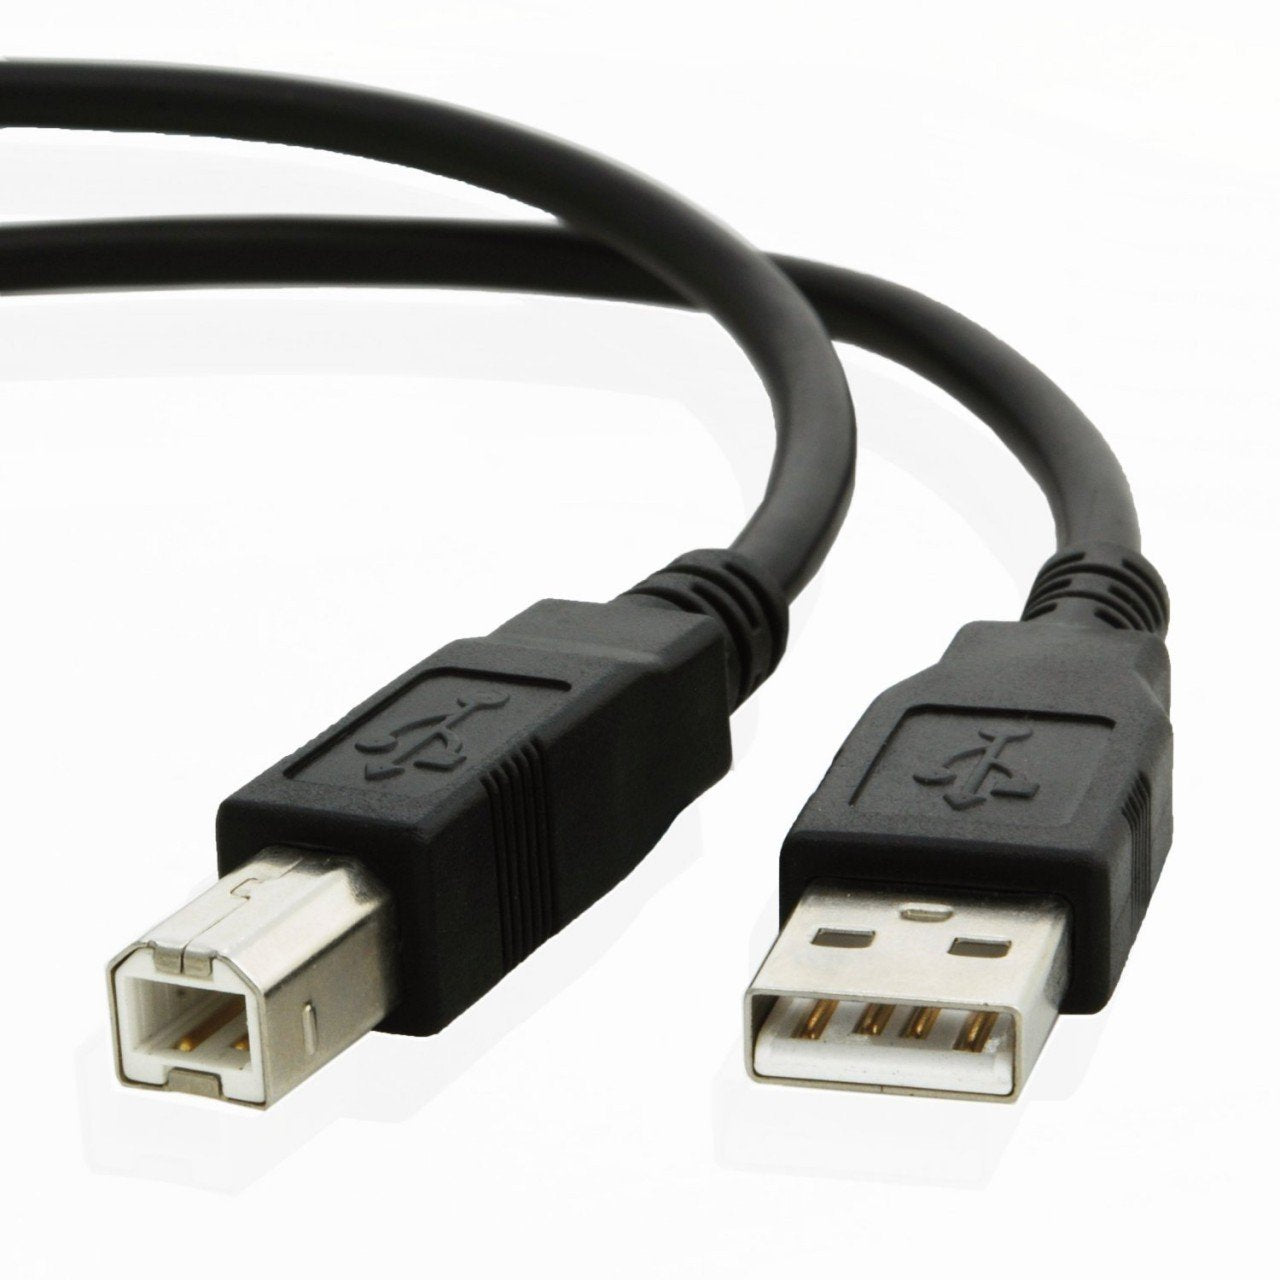 USB cable for Epson DS-780N